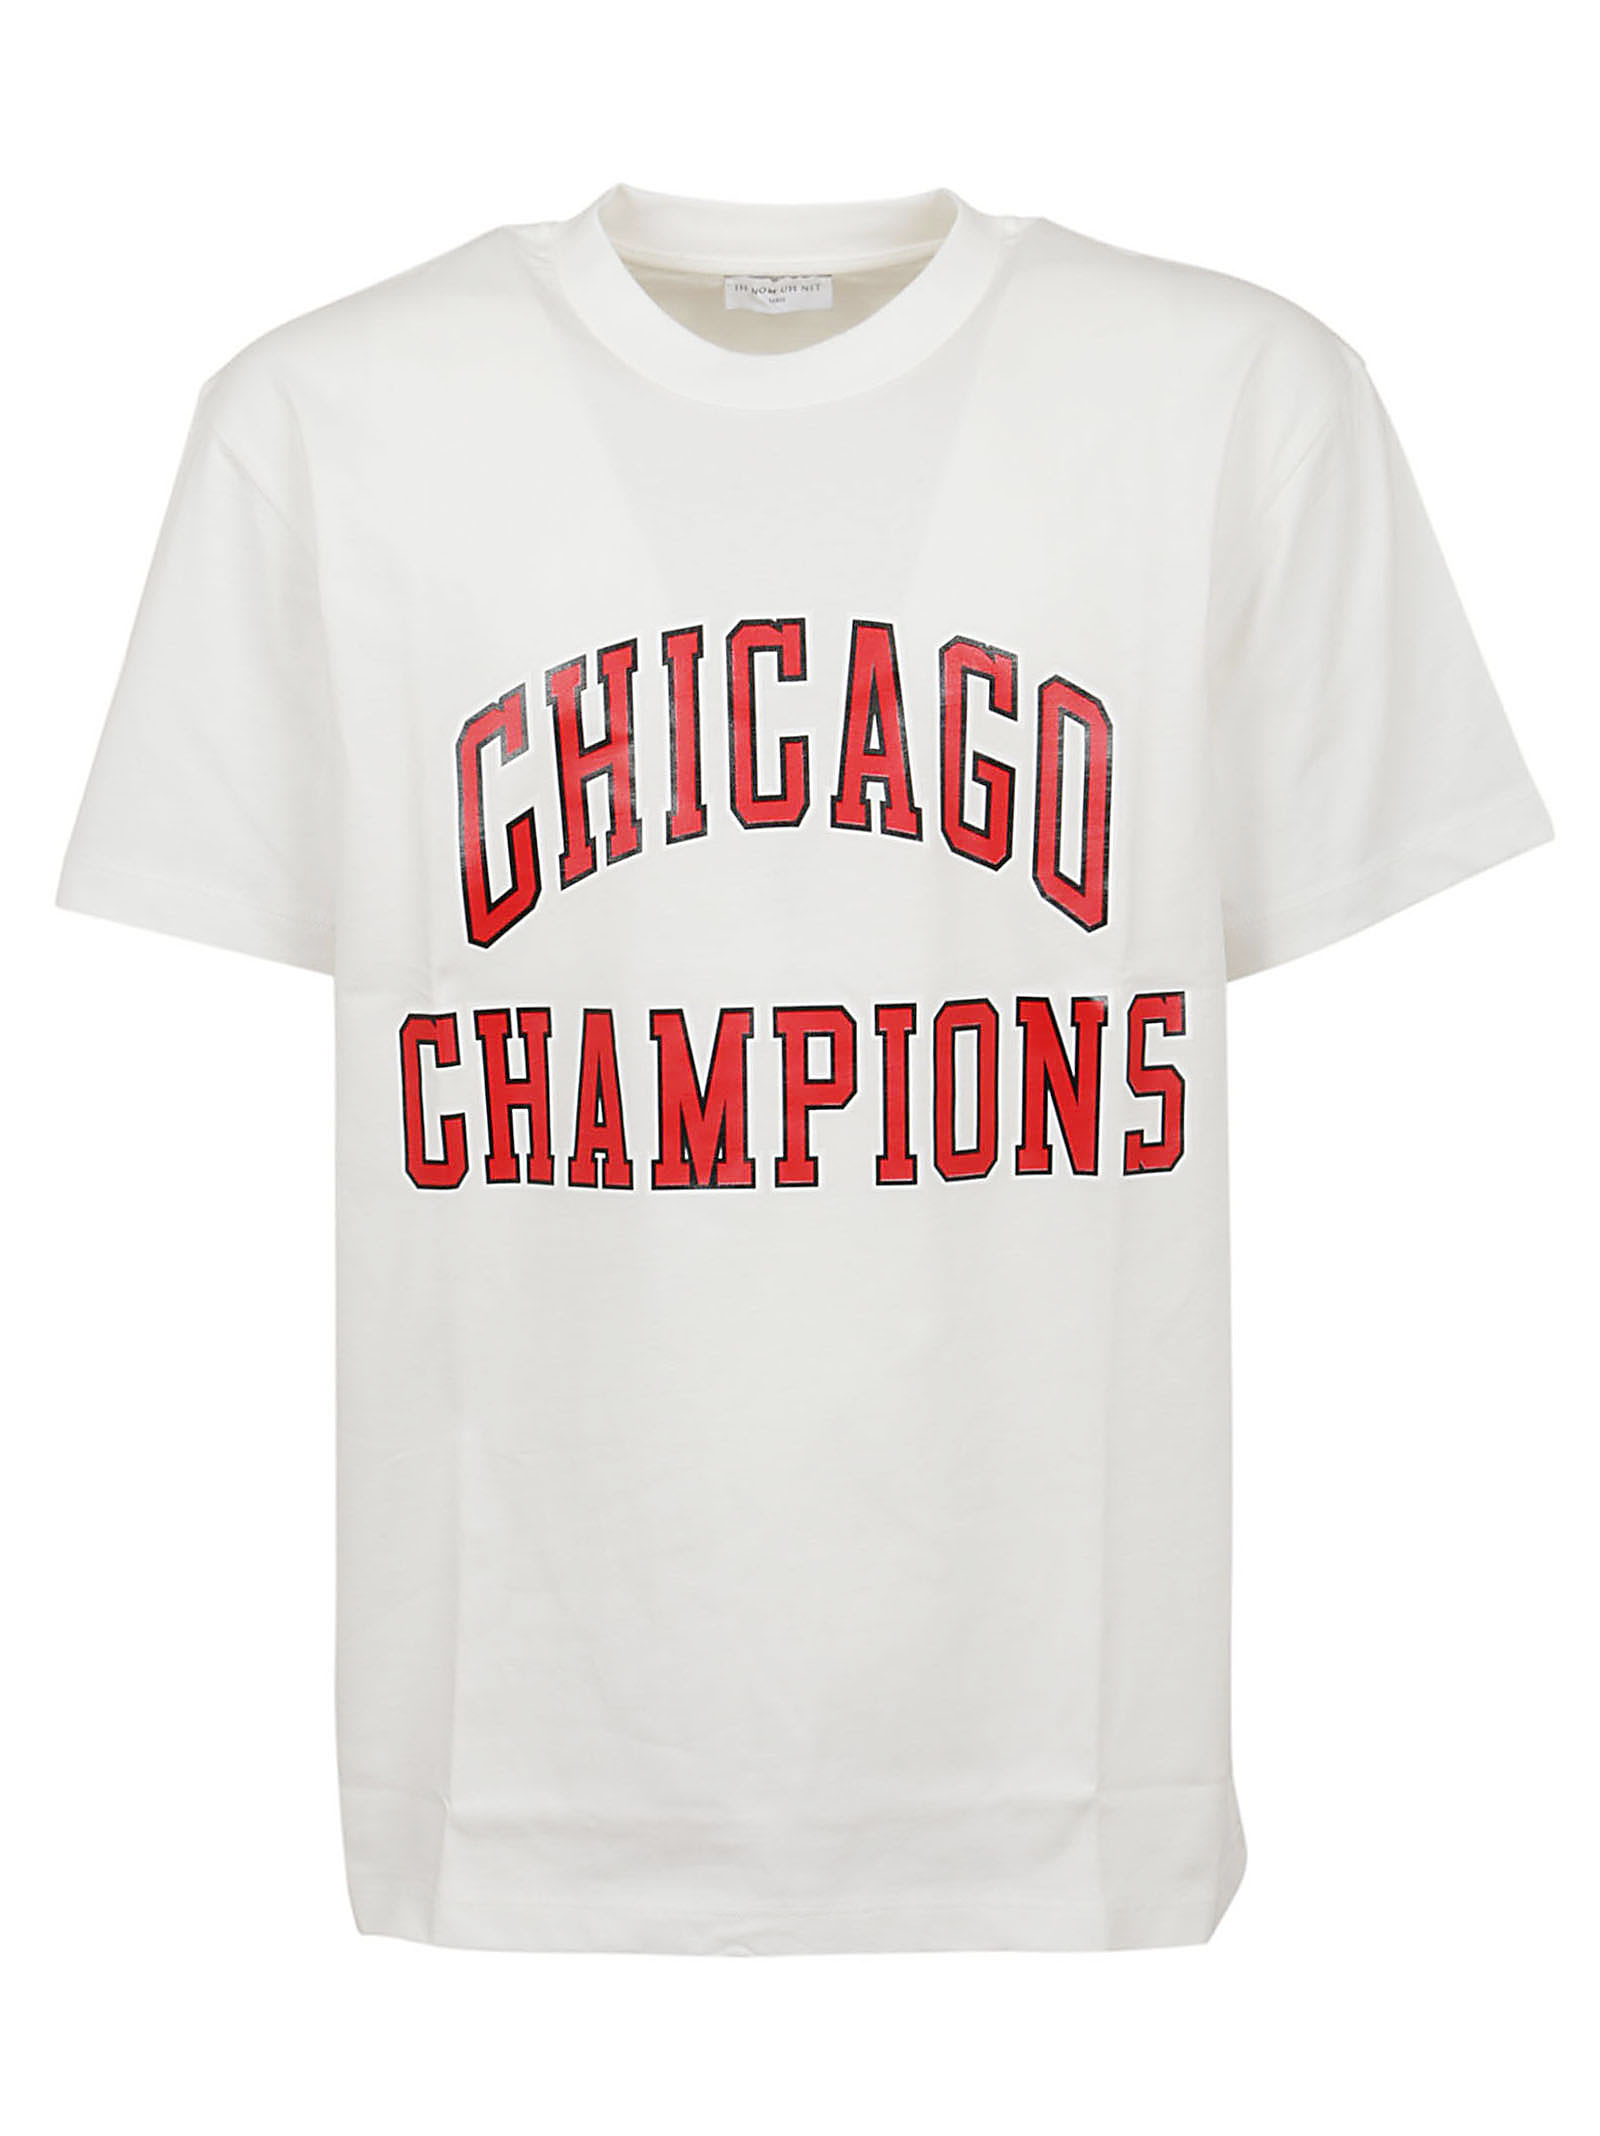 IH NOM UH NIT T-SHIRT CLASSIC FIT WITH CHICAGO CHAMPIONS PRINT ON FRONT AND LOGO,NUS21223.081 081 OFF WHITE